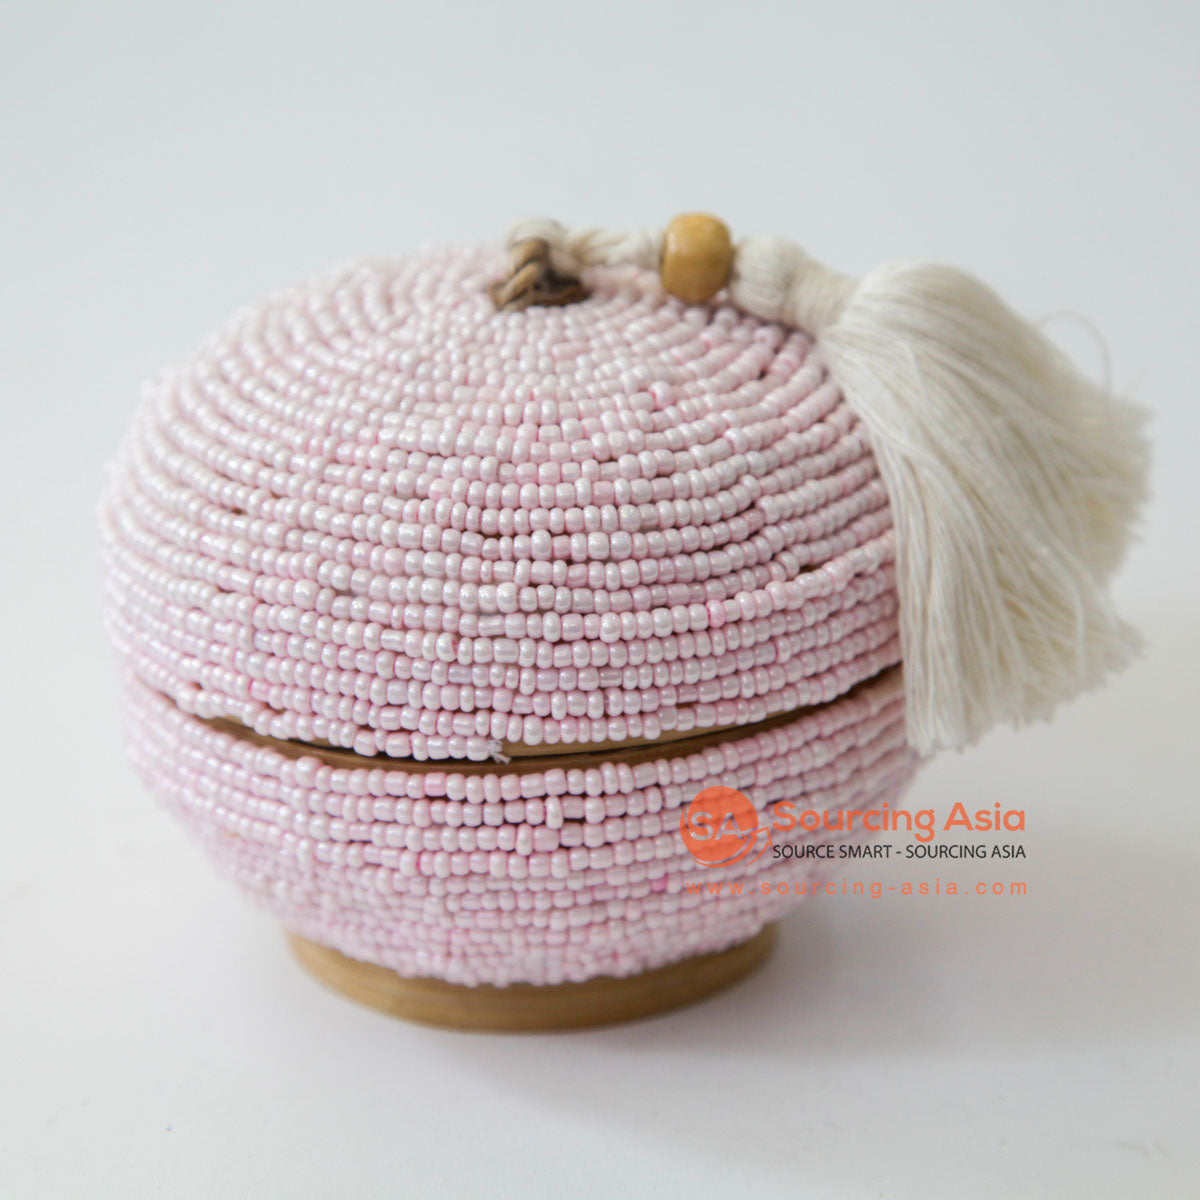 DHL137 PINK BAMBOO ROUND BEADED BOX WITH TASSEL